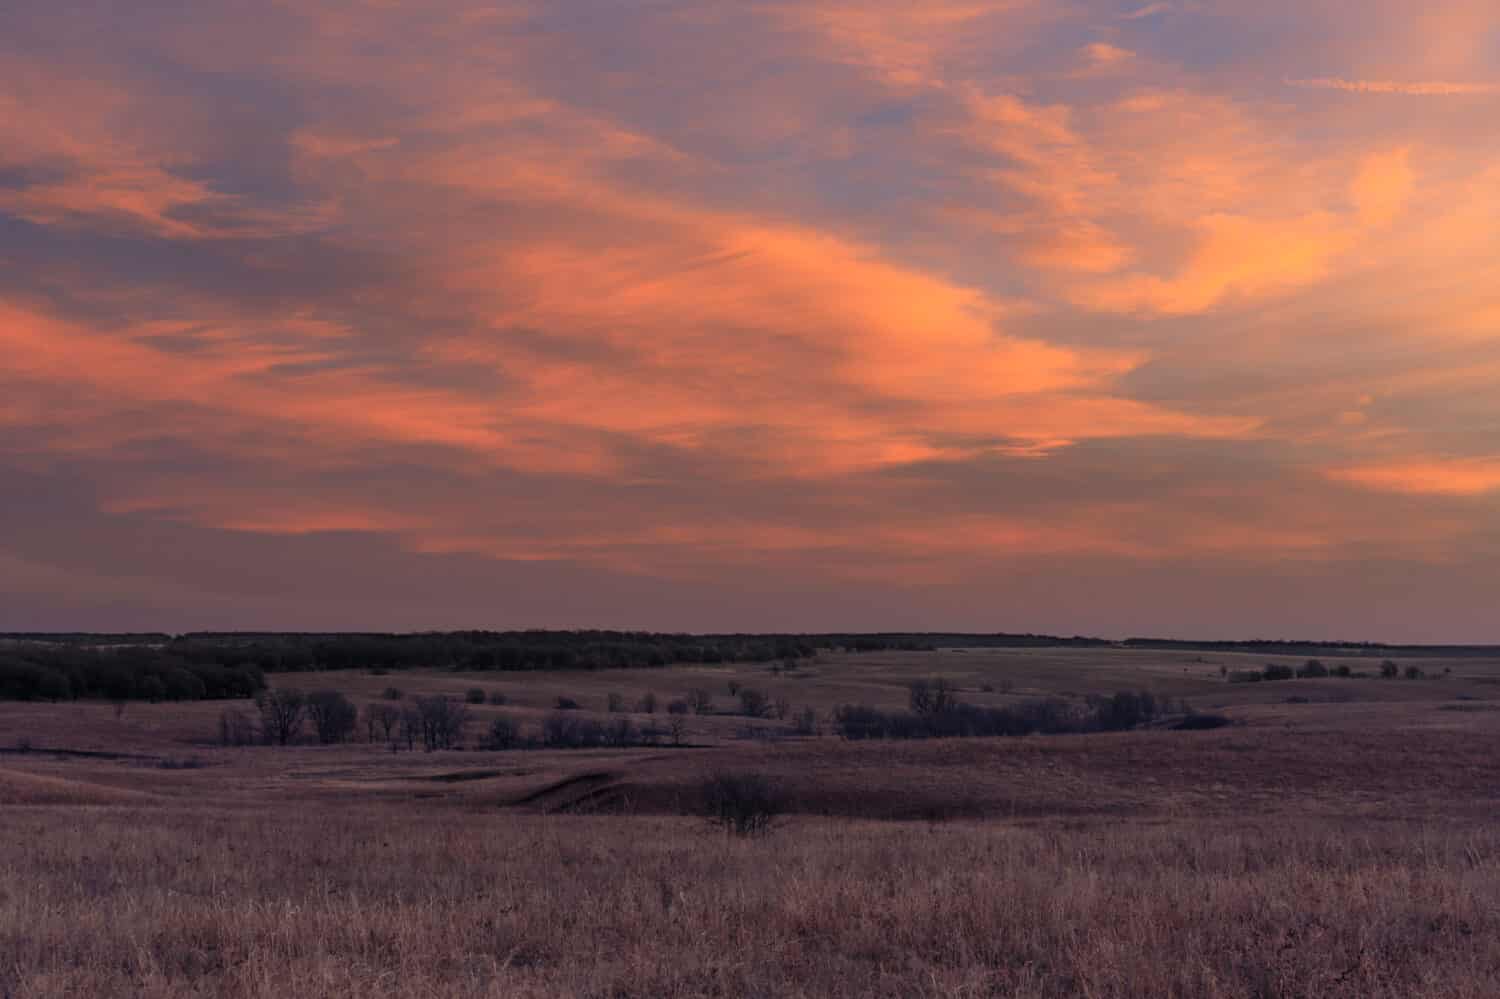 Daybreak as the sun rises in the distance at the Tallgrass Prairie Preserve in Pawhuska, February 2018